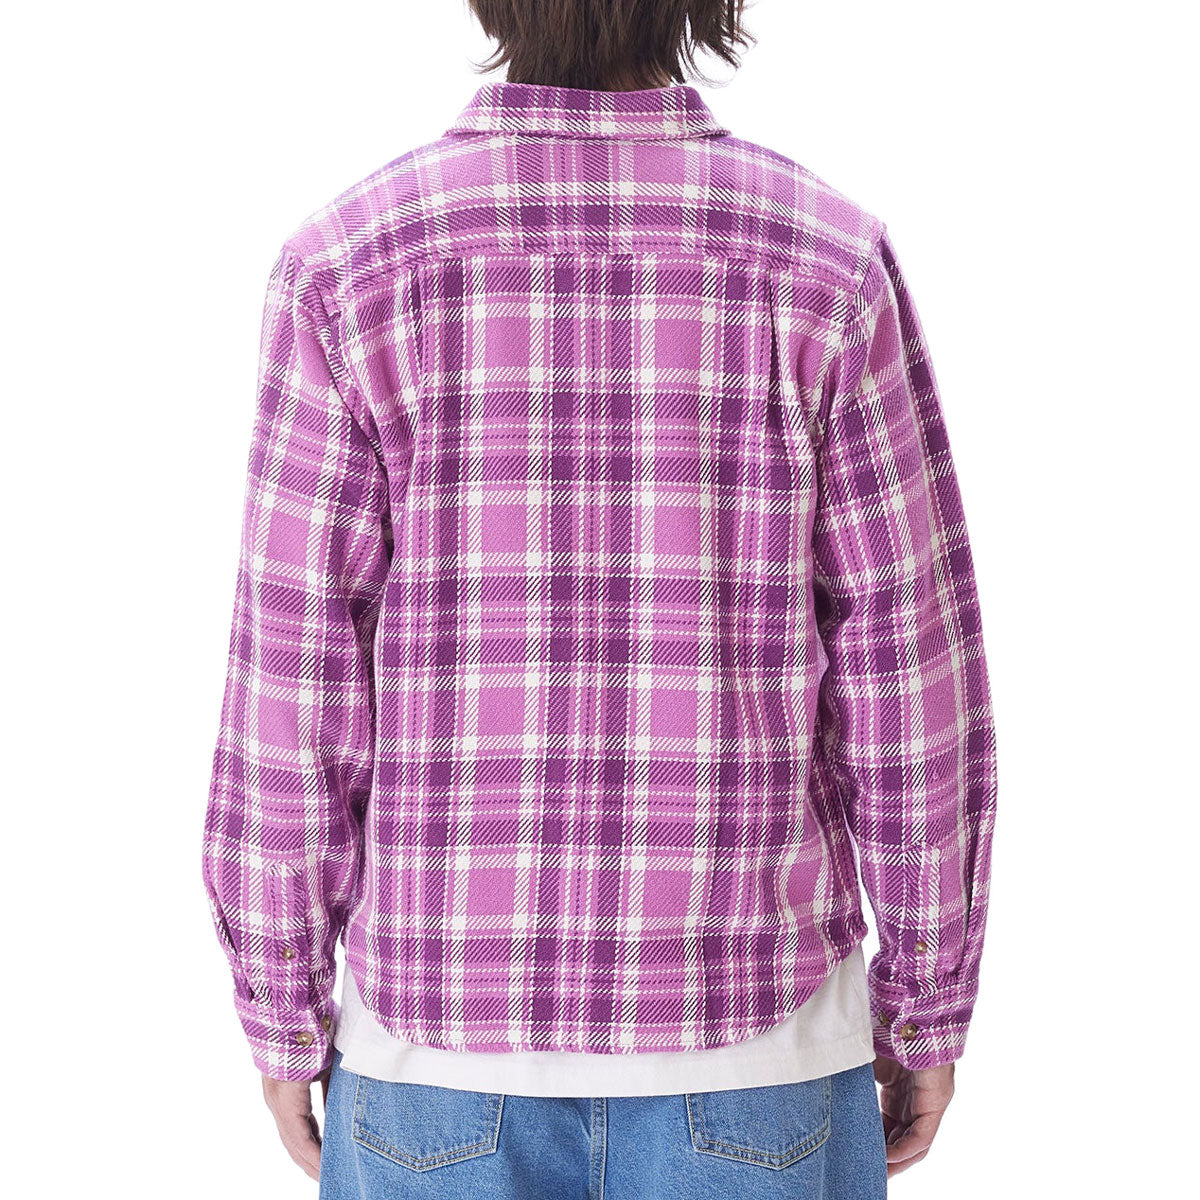 Obey Fred Woven Shirt - Mulberry Purple/Multi image 2